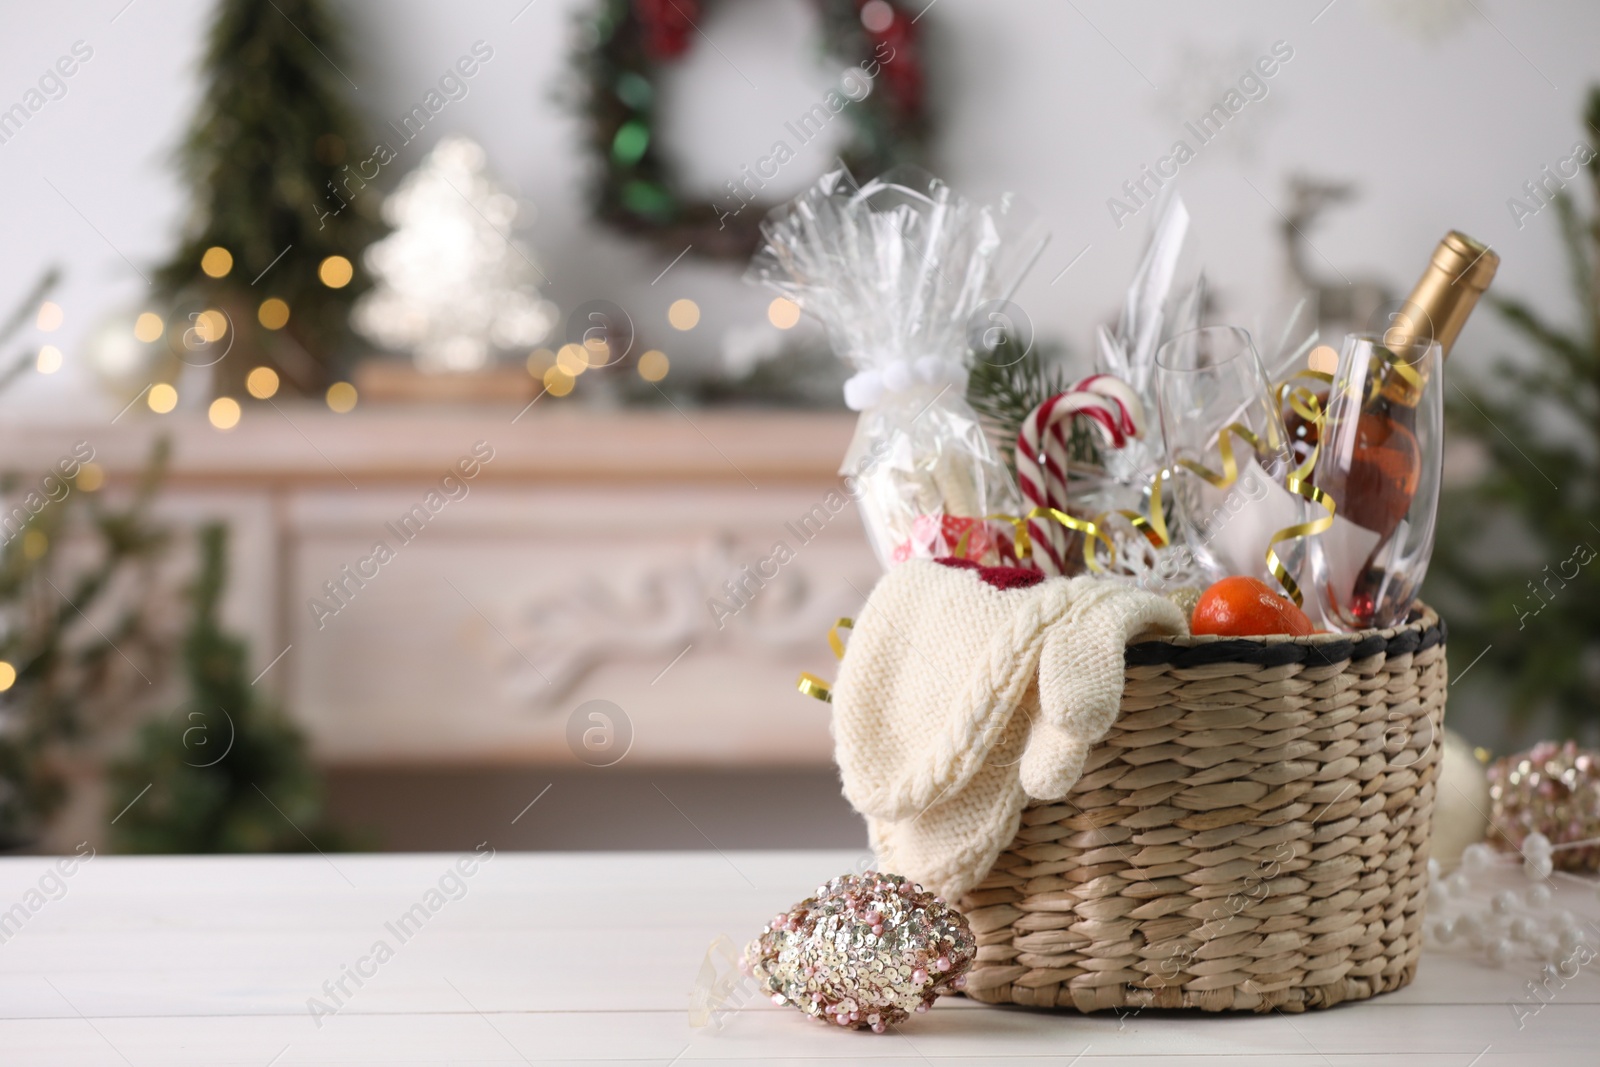 Photo of Wicker basket with Christmas gift set on white table. Space for text